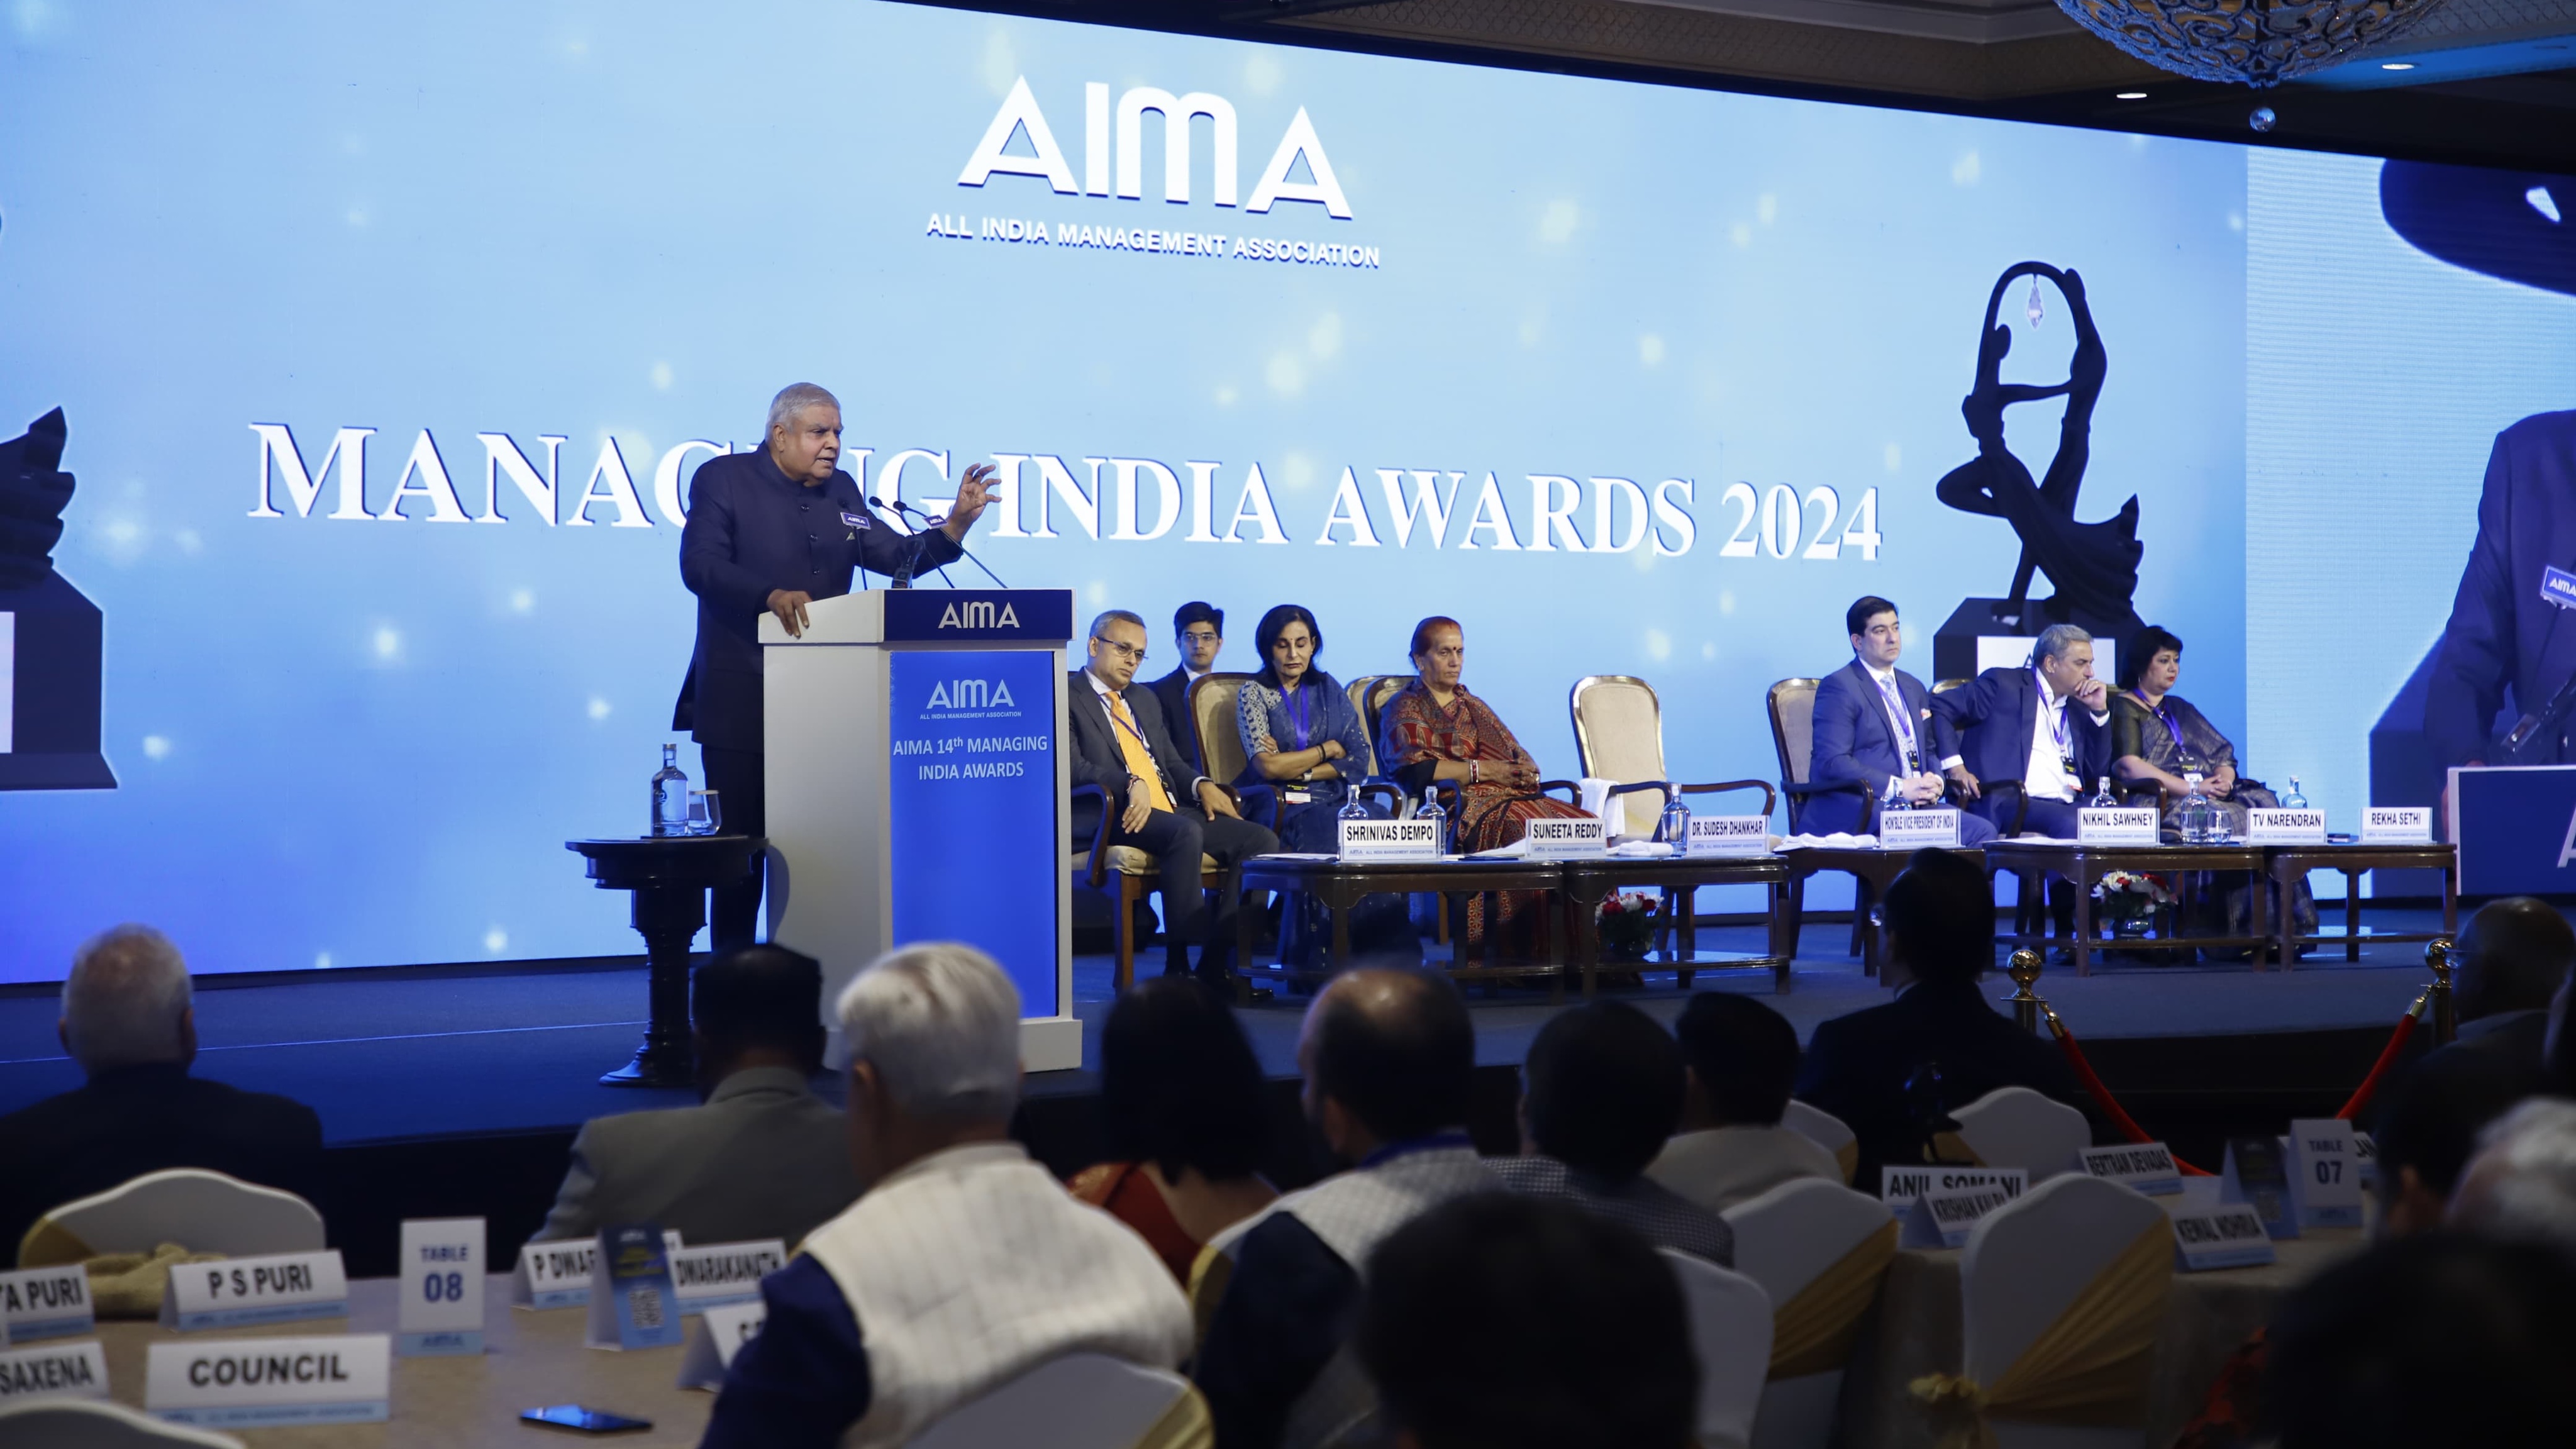 The Vice-President, Shri Jagdeep Dhankhar delivering the keynote address at the 14th AIMA Managing India Awards in New Delhi on April 23, 2024